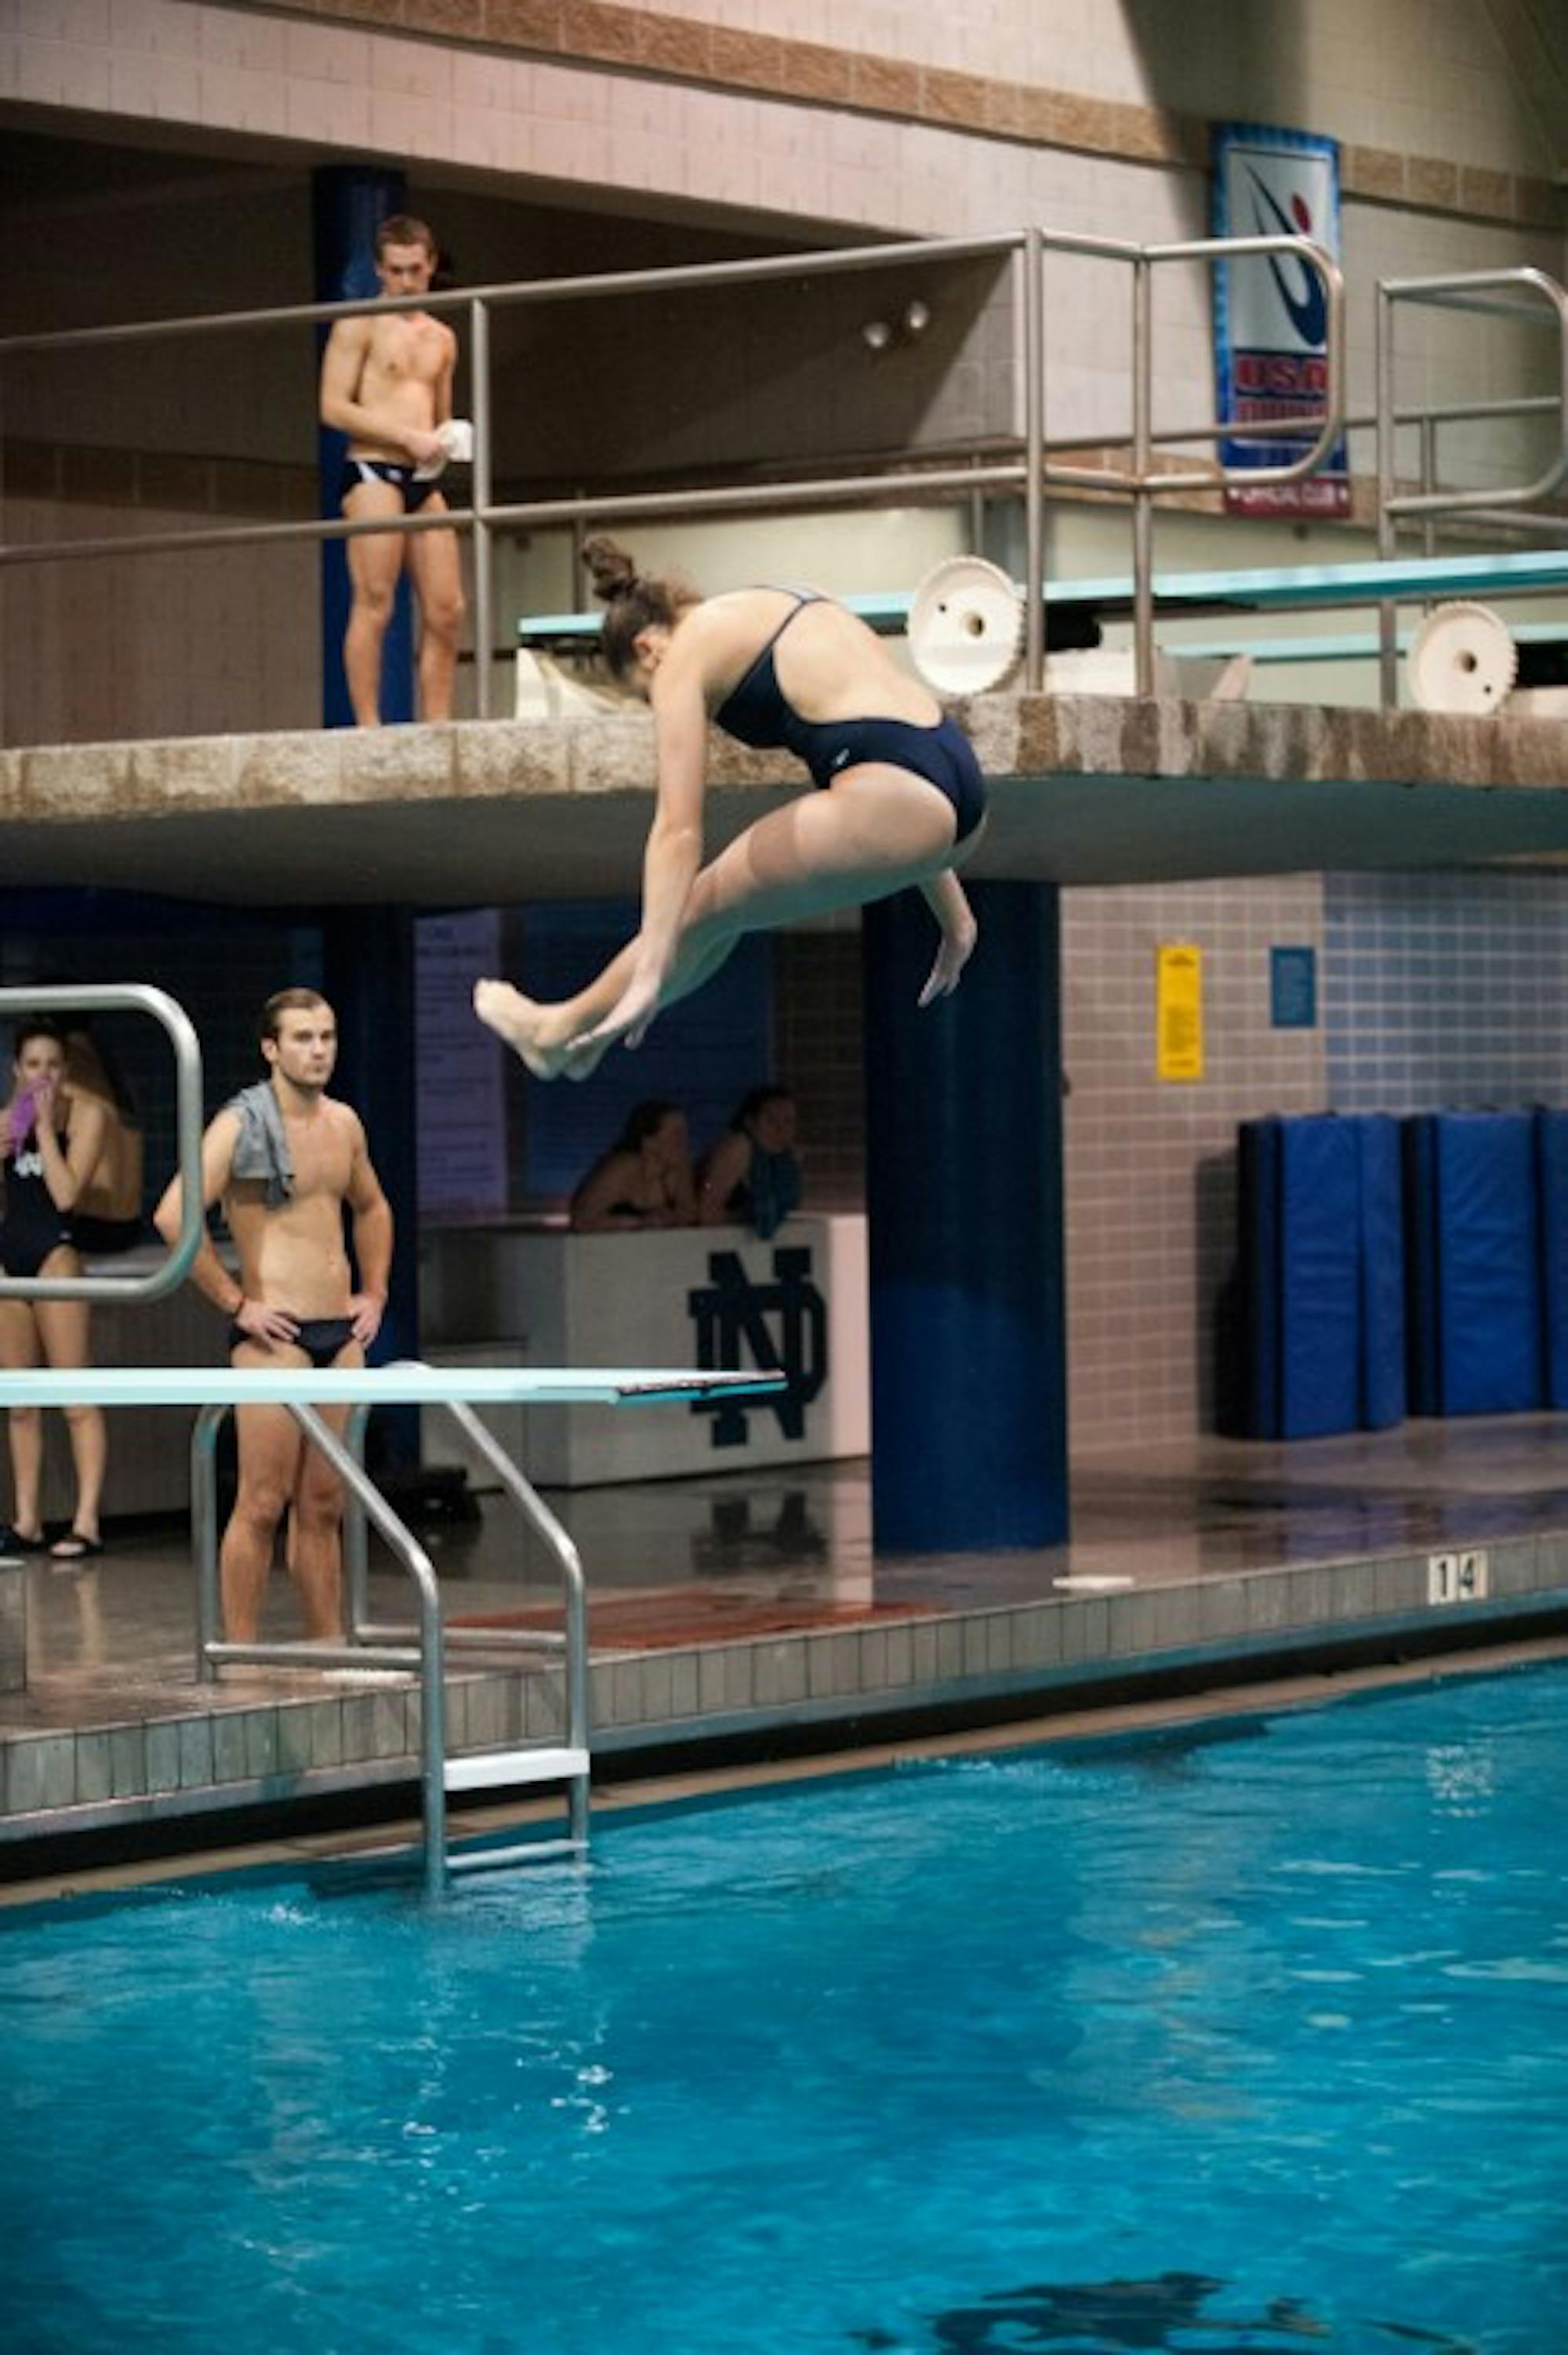 Senior diver Allison Casareto competes at Rolfs Aquatic Center on Feb. 7.  Casareto is the only Irish diver to qualify for the NCAAs.